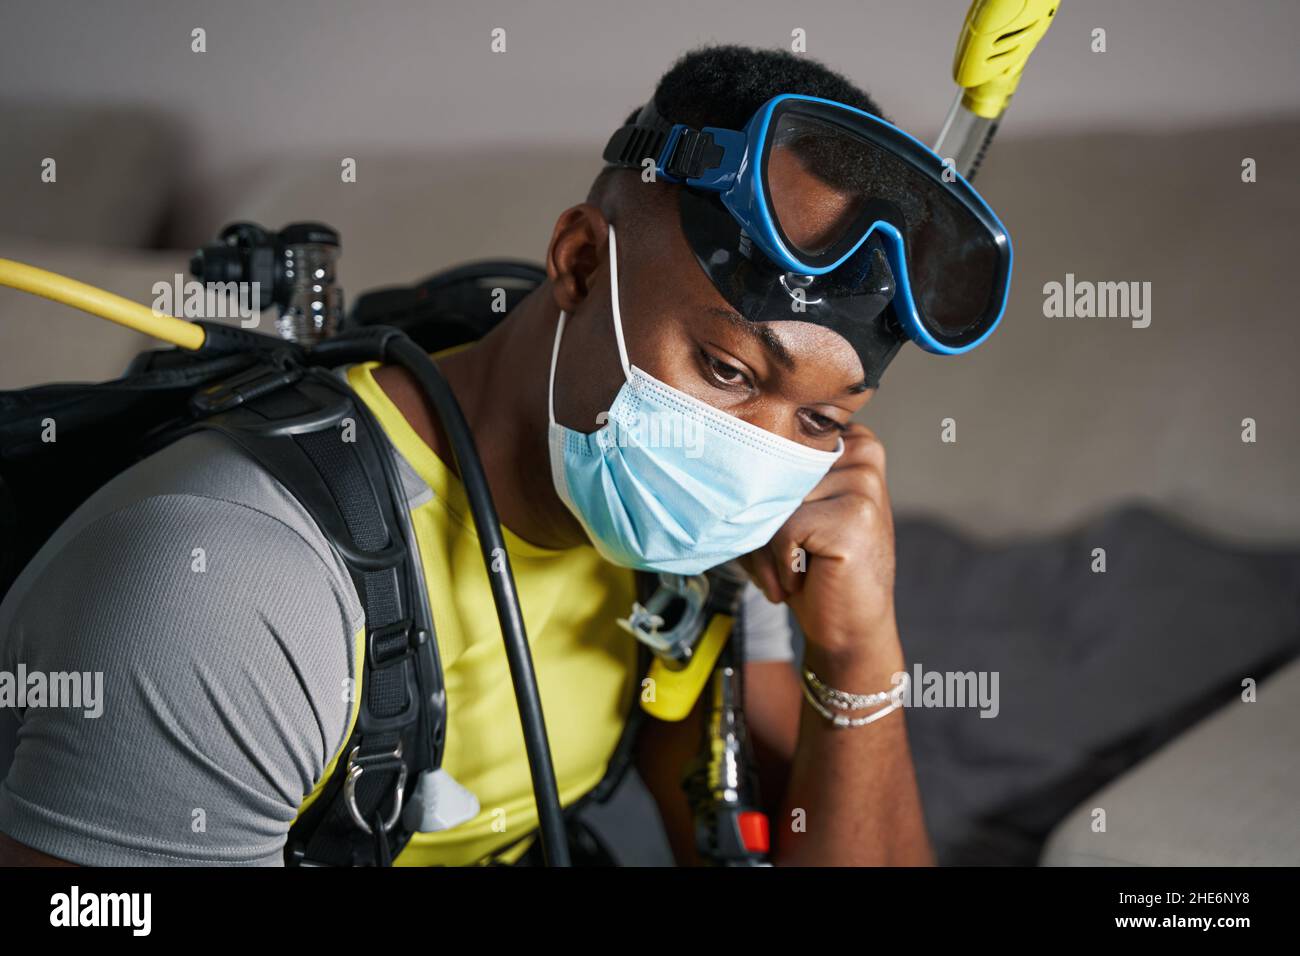 Depressed scuba diver sitting at home in gear Stock Photo